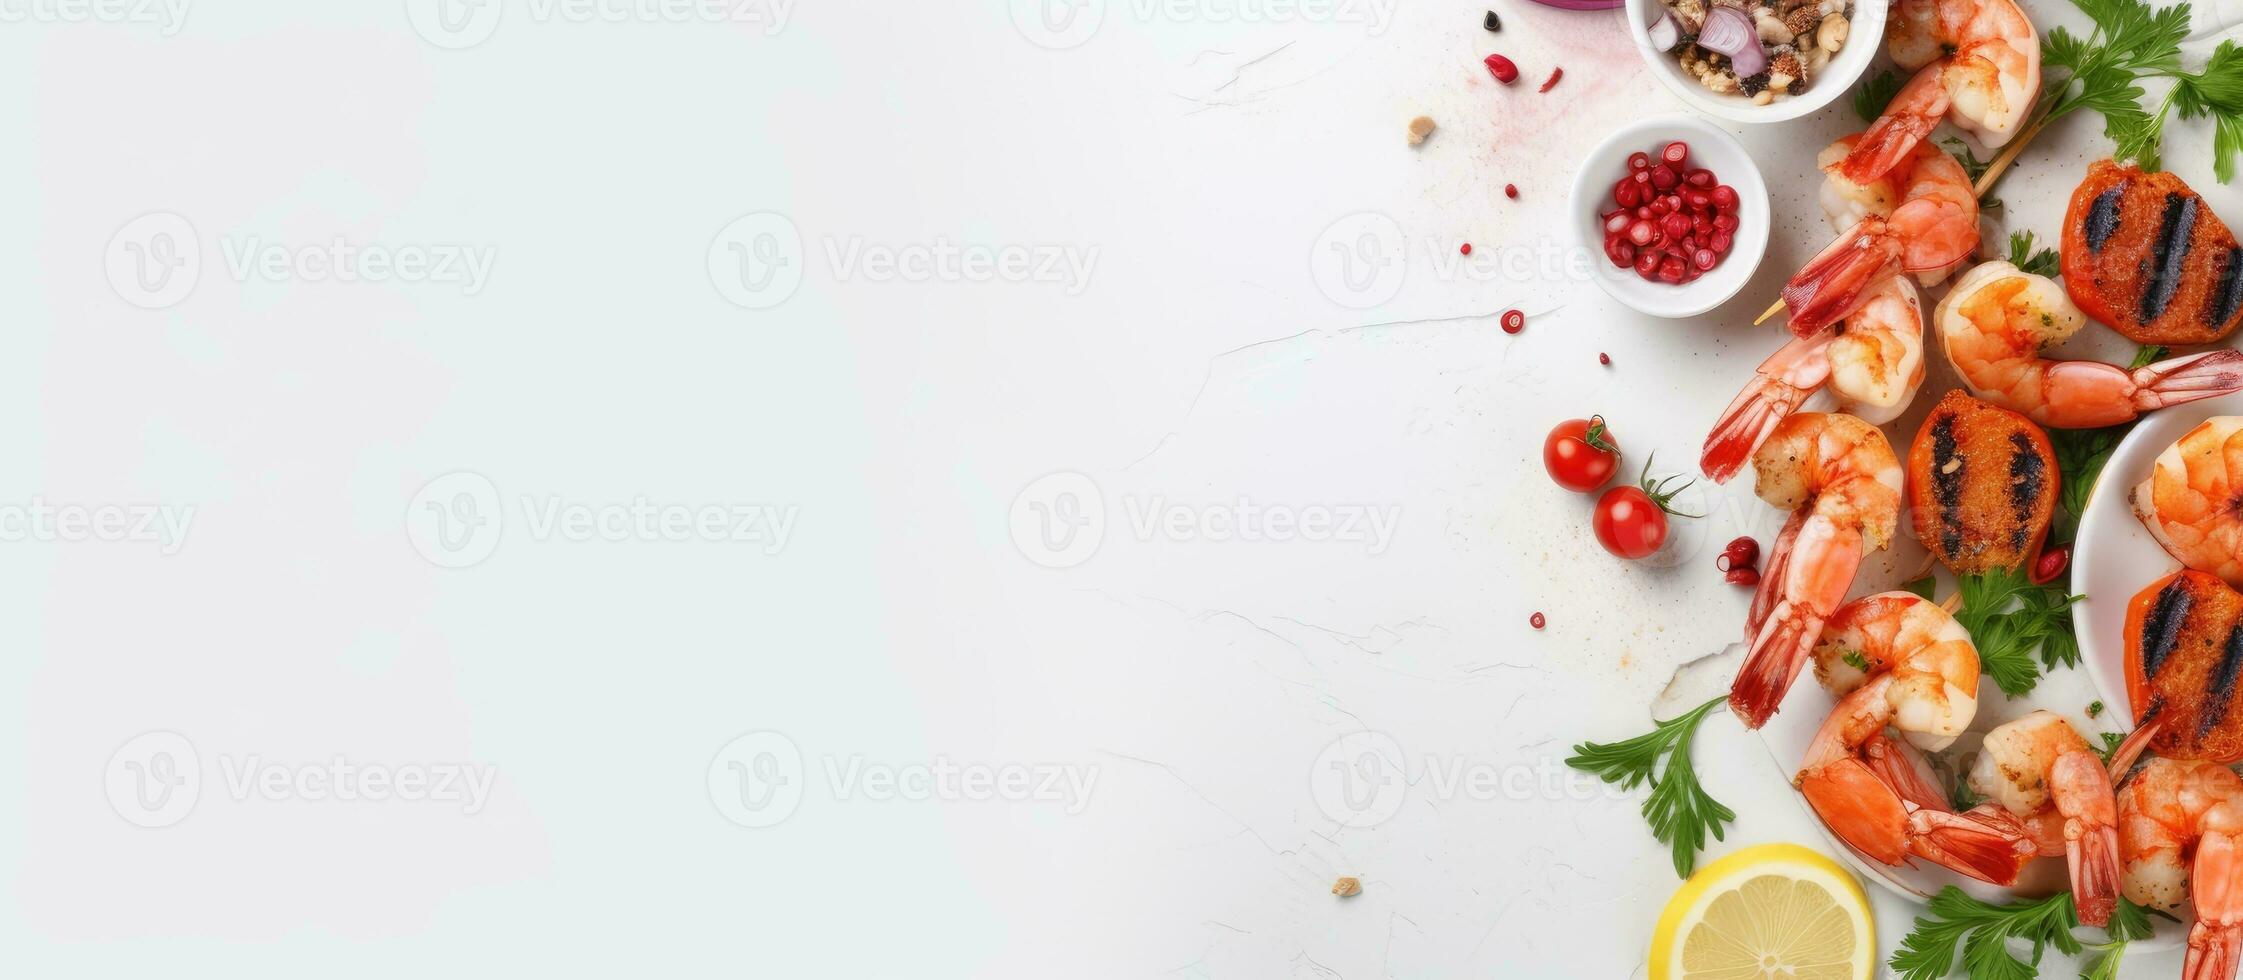 The appetizer in a Mediterranean kitchen is shrimp skewers, displayed on a white tabletop with photo